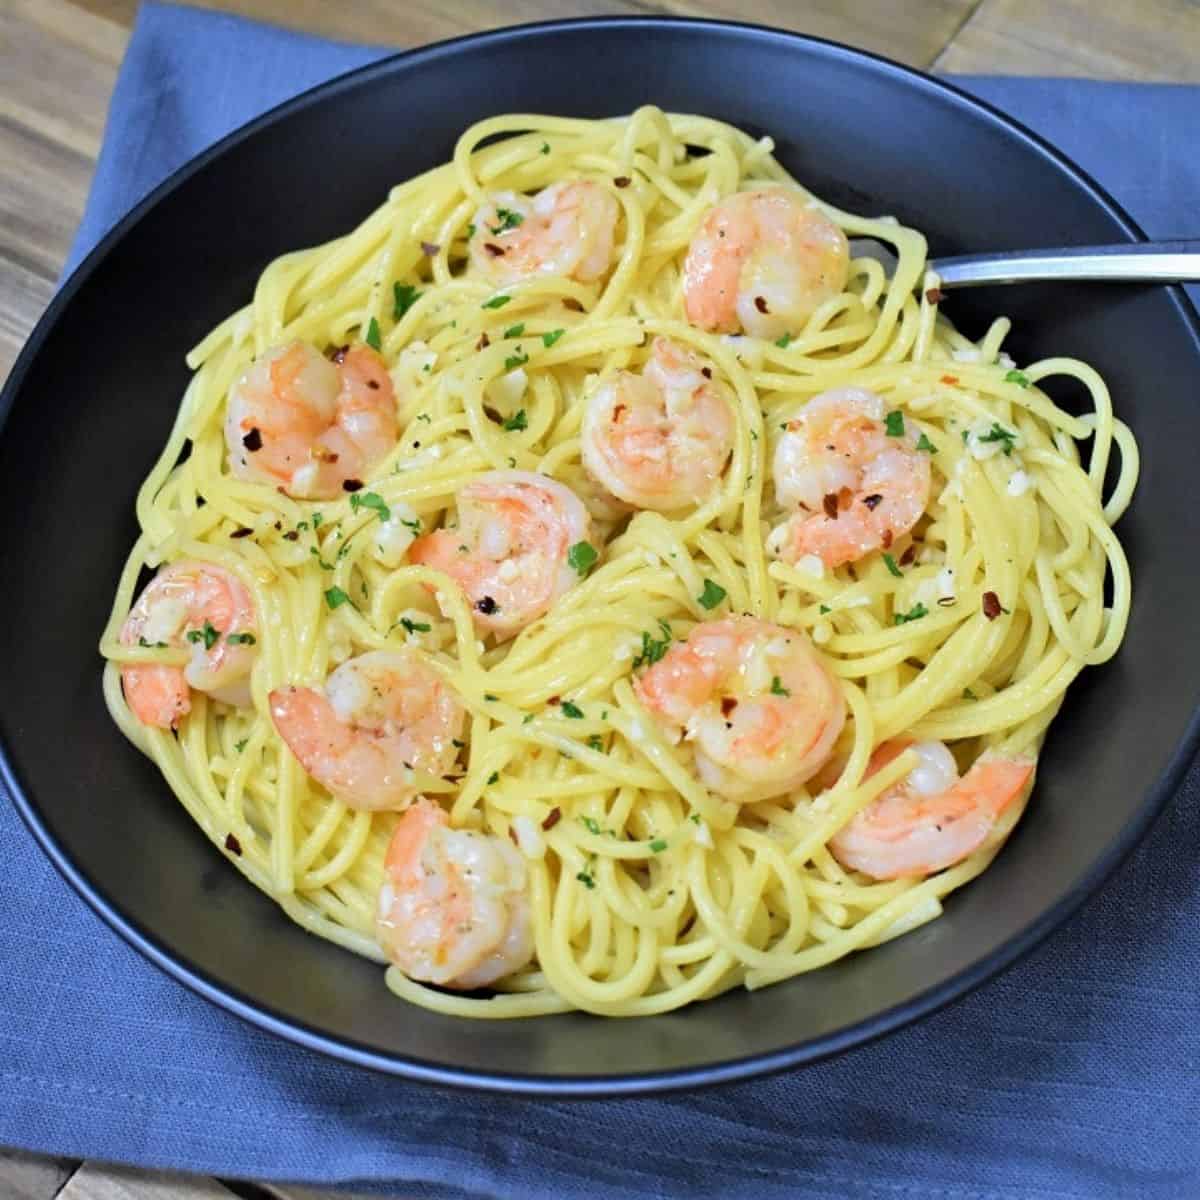 Spaghetti topped with shrimp in an oil and garlic sauce, garnished with parsley and served in a large black bowl.